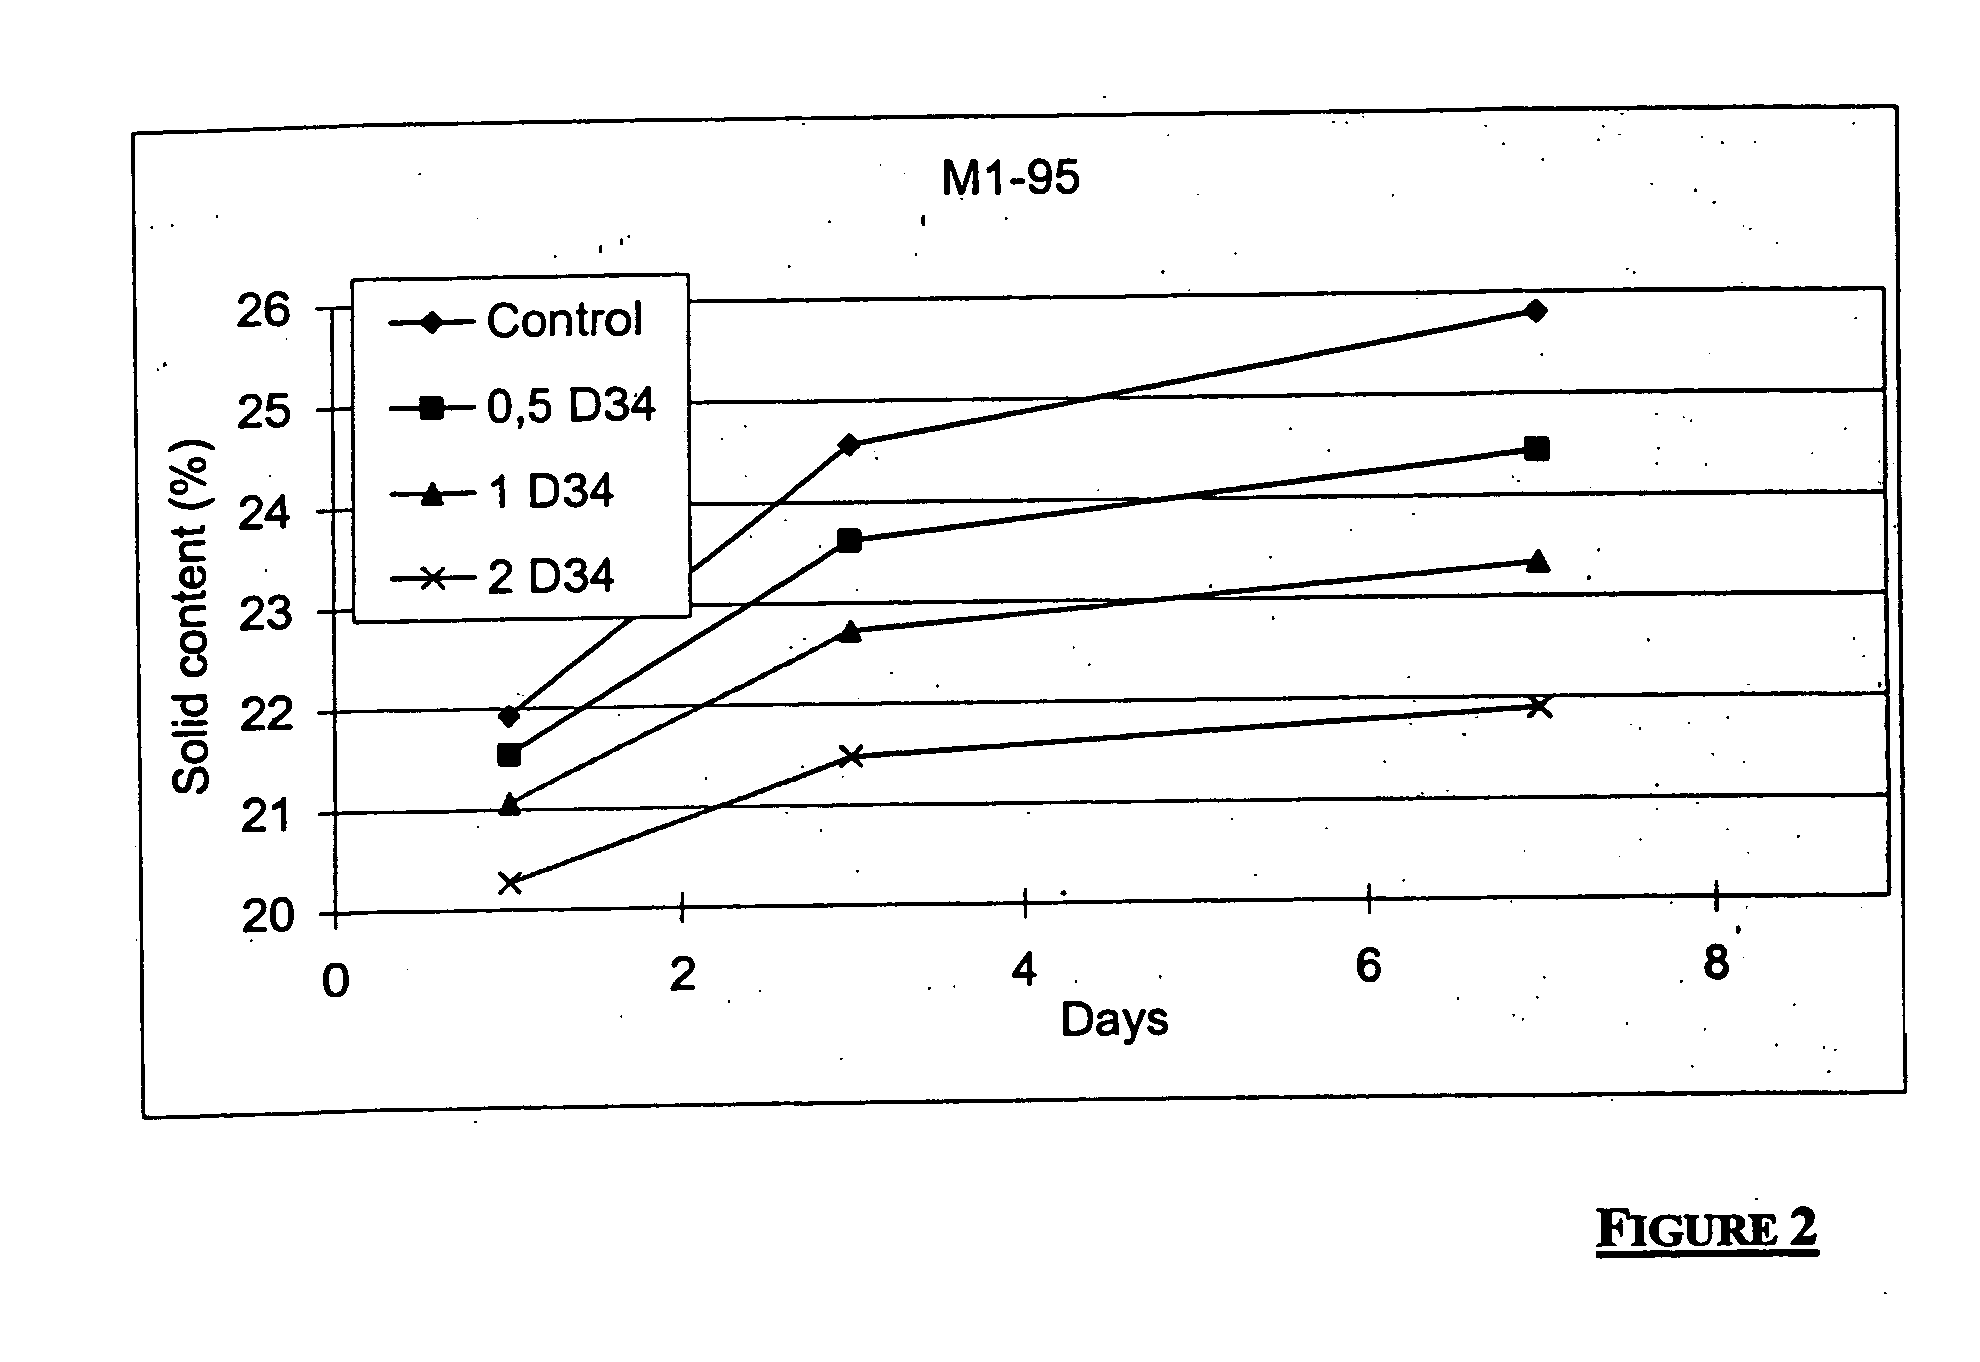 Thermostable amylase polypeptides, nucliec acids encoding those polypeptides and uses thereof